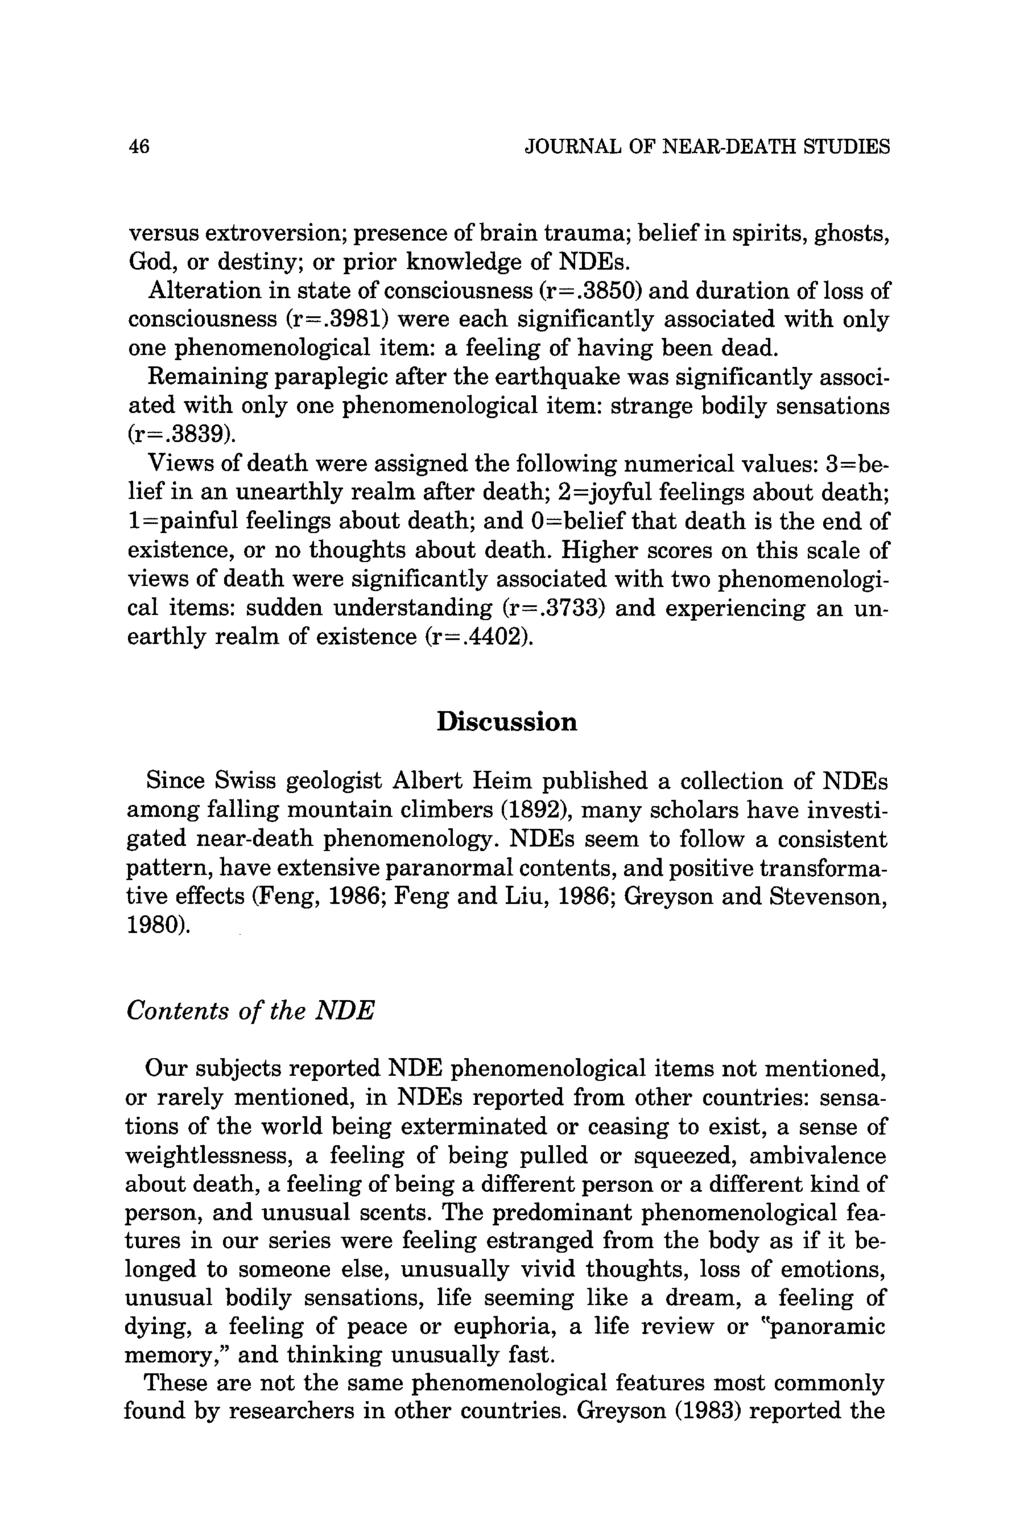 46 JOURNAL OF NEAR-DEATH STUDIES versus extroversion; presence of brain trauma; belief in spirits, ghosts, God, or destiny; or prior knowledge of NDEs. Alteration in state of consciousness (r=.